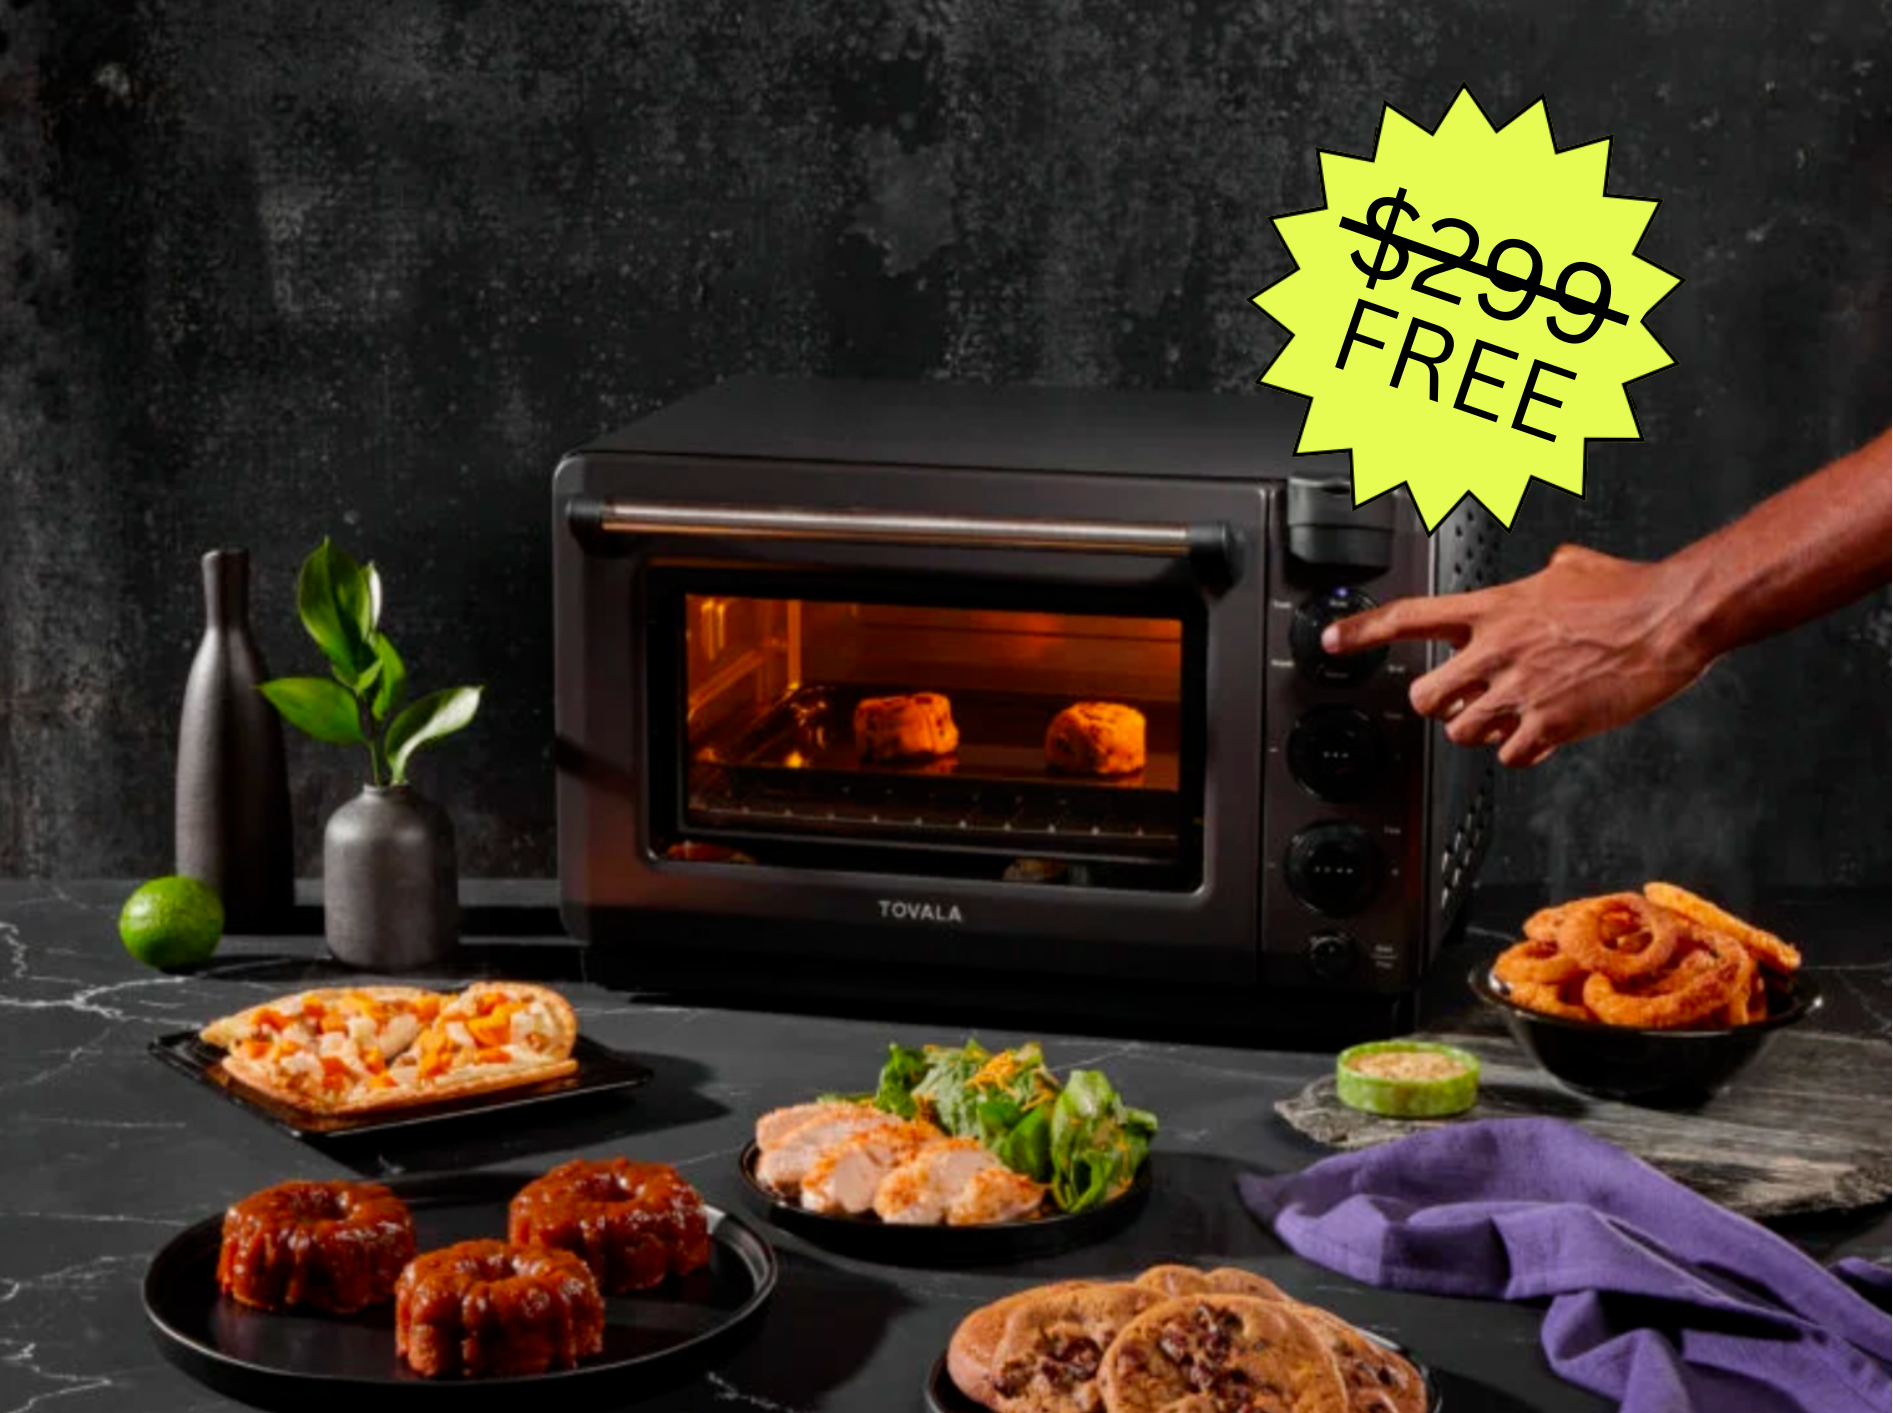 Ready to Cook Smarter? Don’t Miss Tovala’s Best Deal Ever This Memorial Day